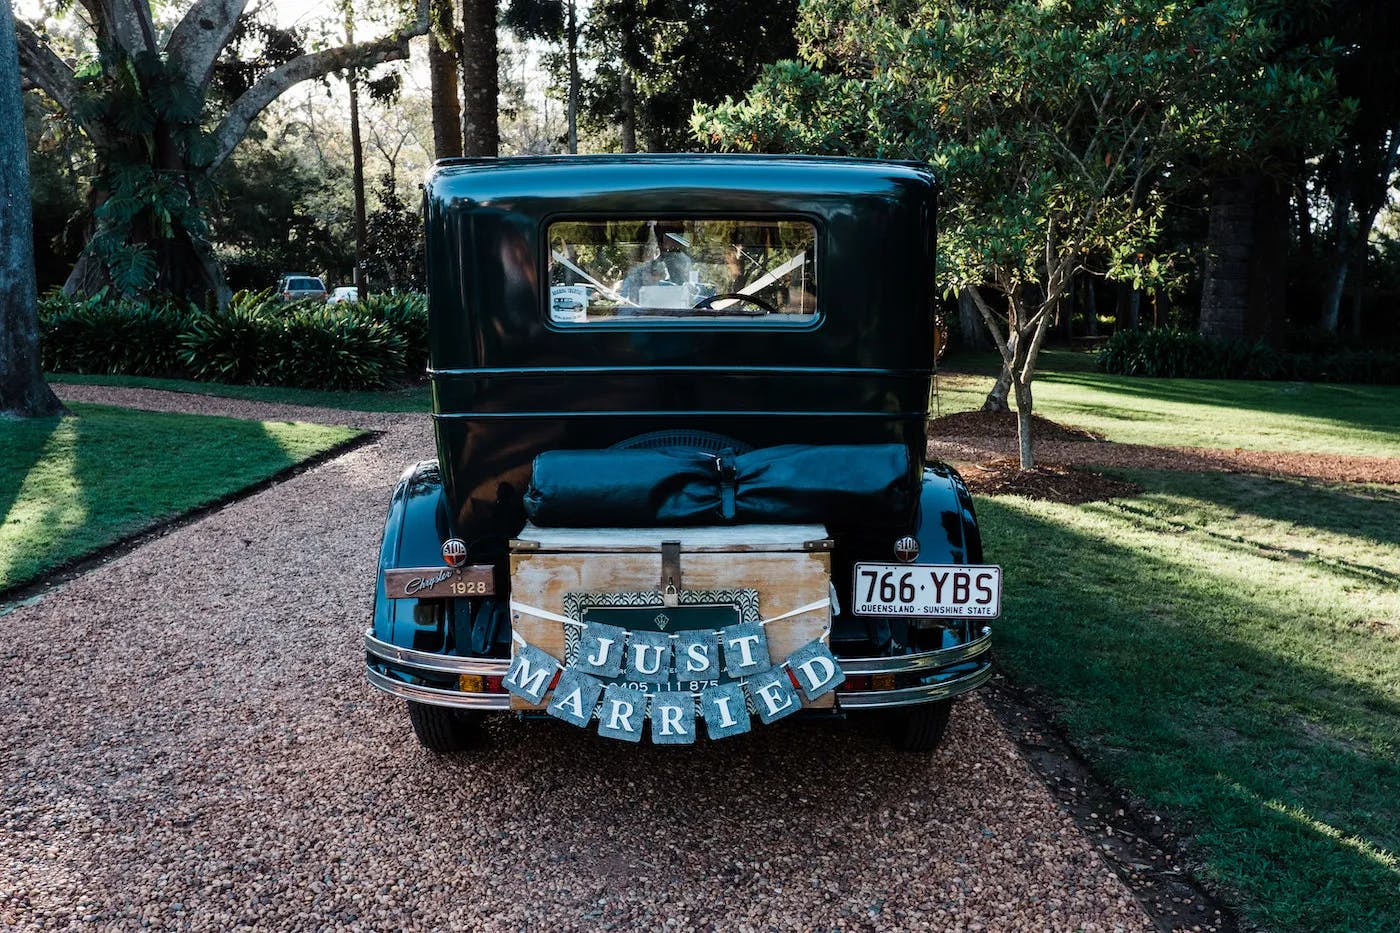 A vintage car with a "Just Married" sign on the back, adorned with small decorations, is parked on a gravel driveway. The surrounding area includes trees and neatly manicured grass, suggesting a serene, outdoor setting.